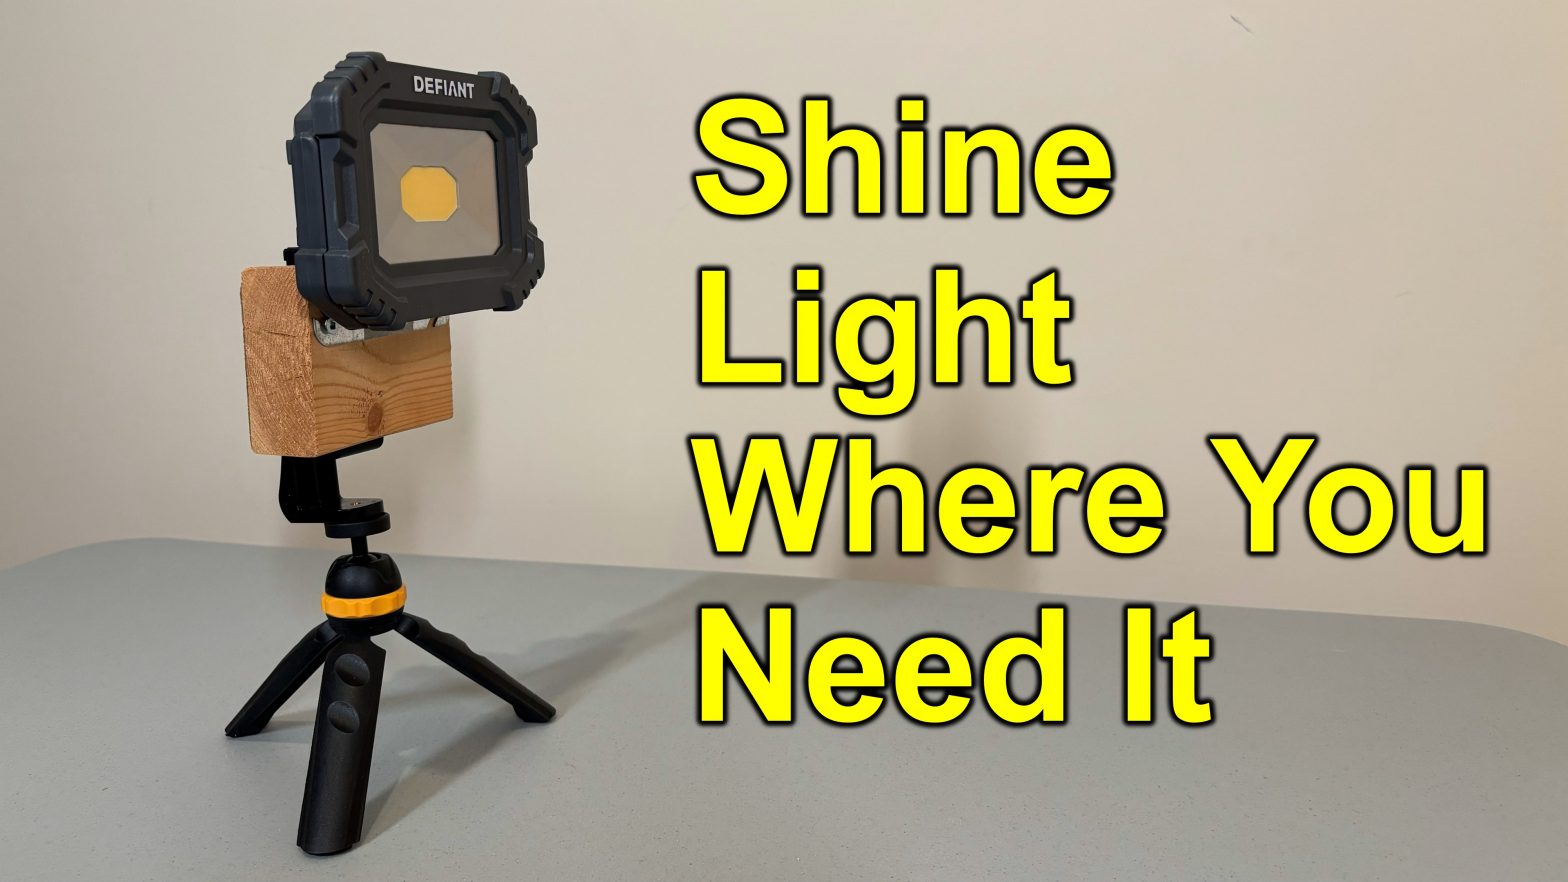 Mount your LED Rechargeable Work Light on a Tripod; Direct the light where you need it